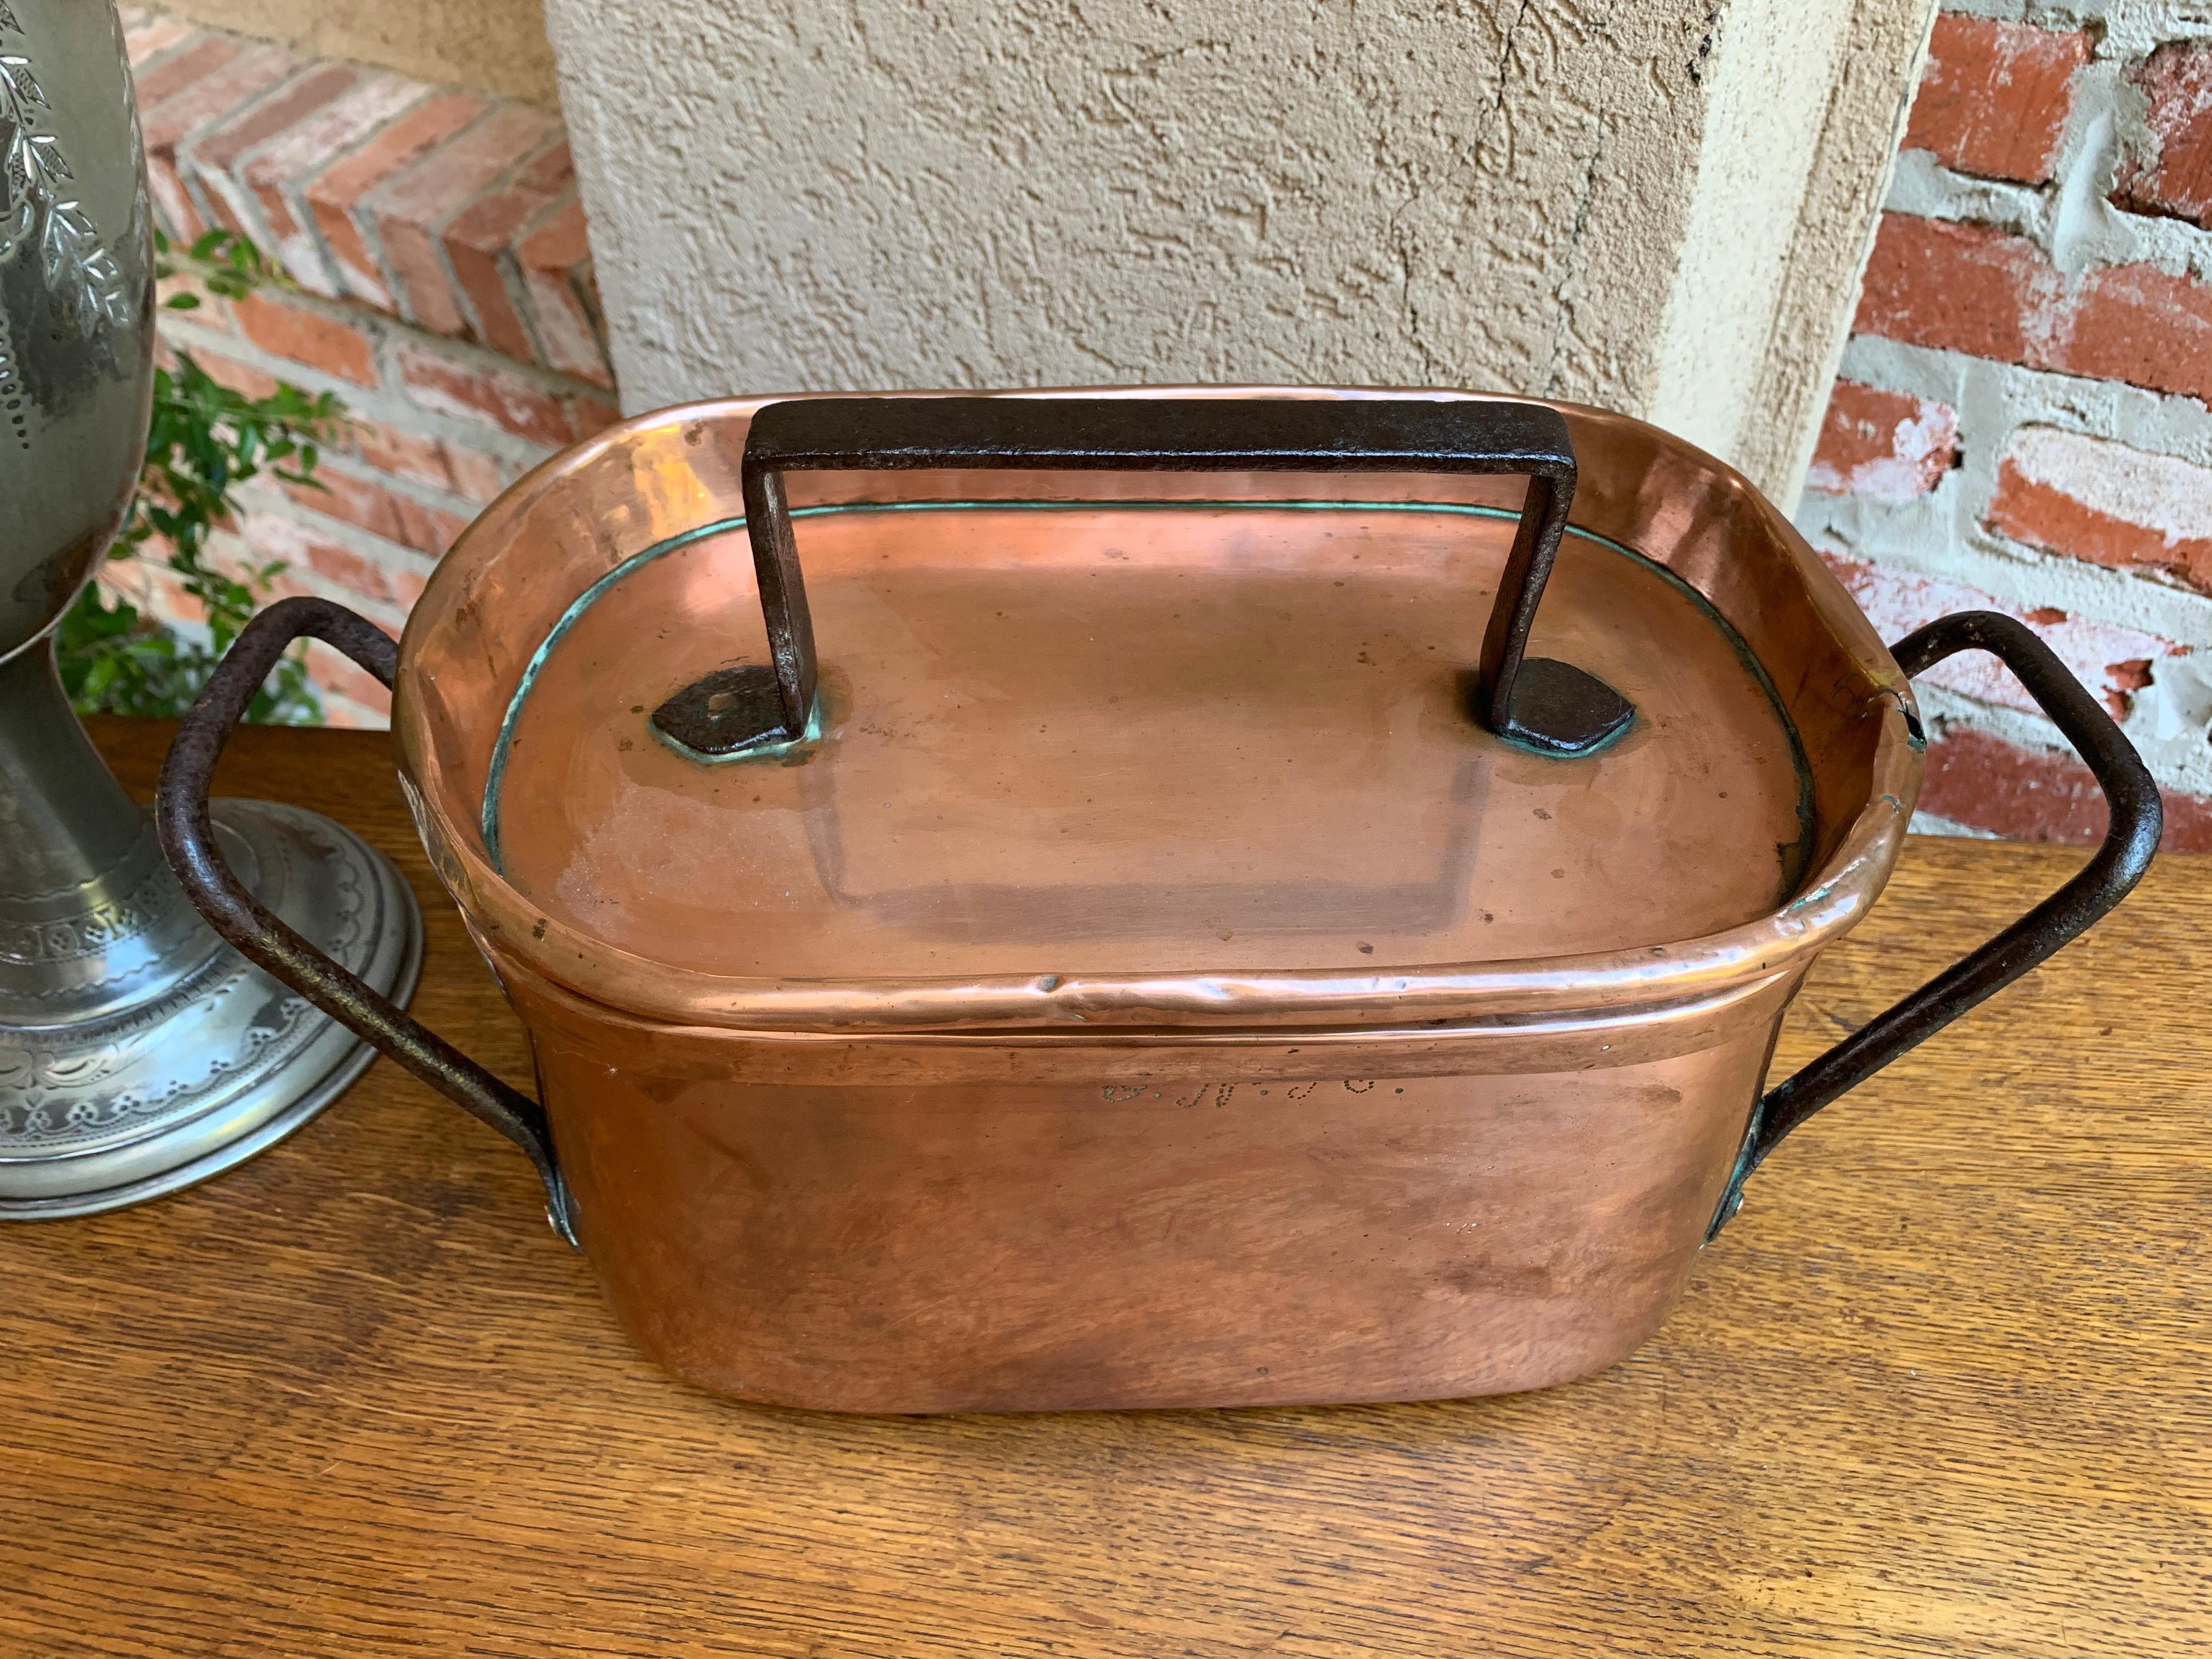 Direct from France, a large oblong antique French copper pot/pan vessel with lid~
~Beautiful copper, polished in France before we exported it~
~Riveted, large iron handles on either side of the pot AND on the lid~
~Hand rolled edges on the